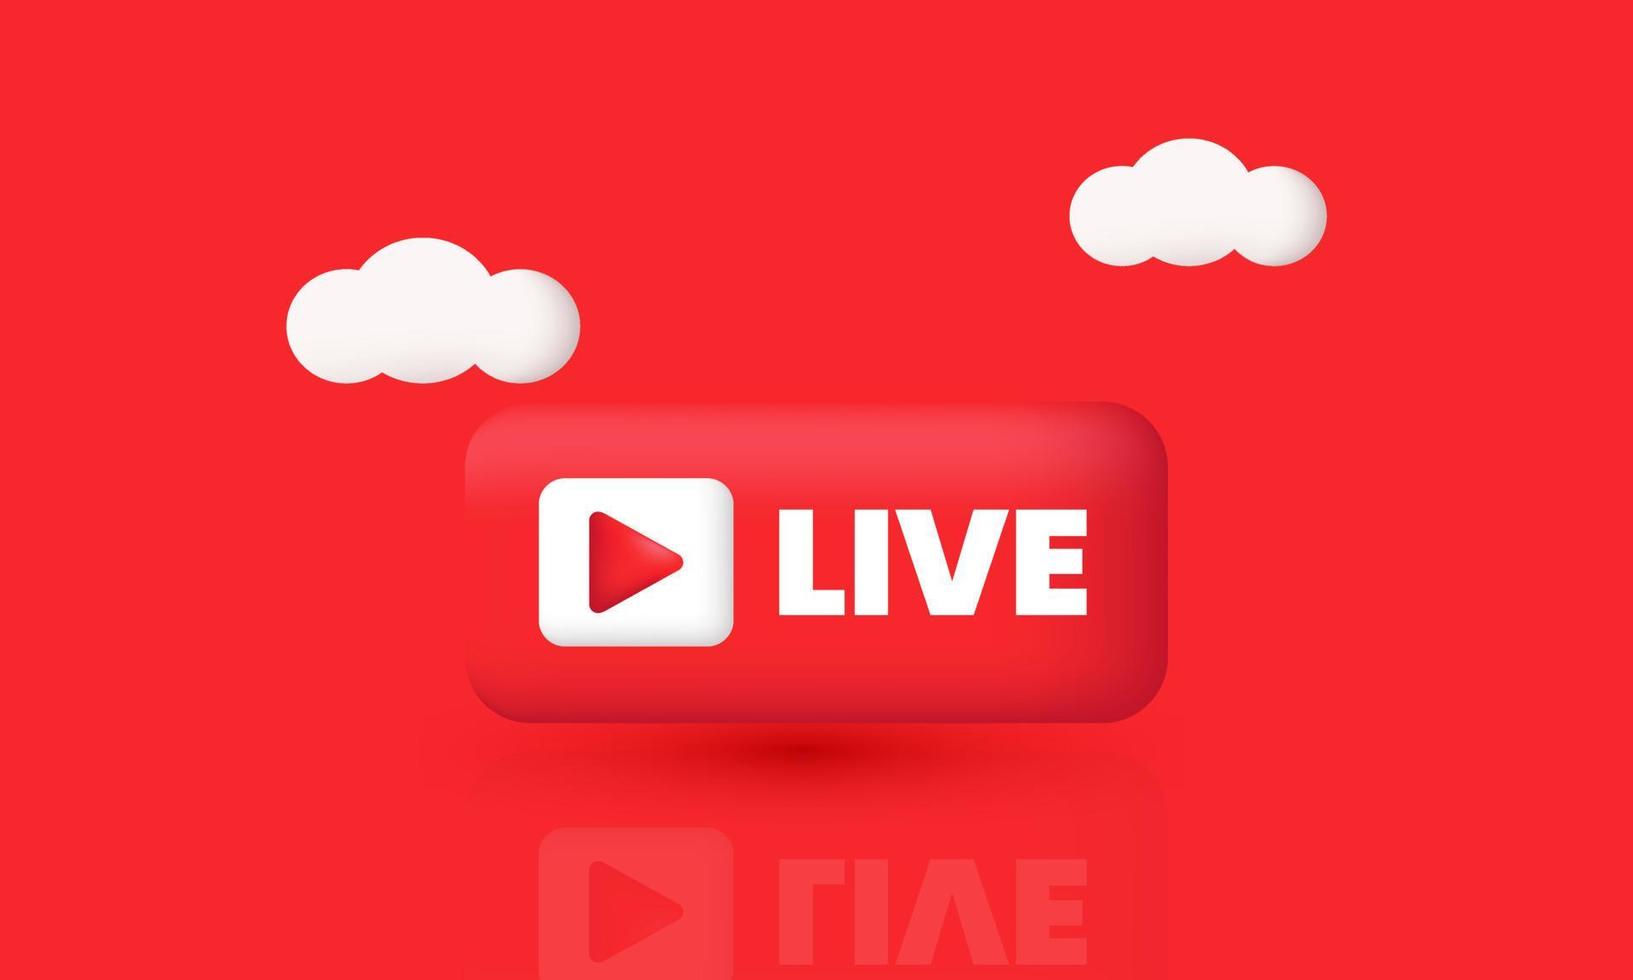 unique 3d realistic cartoon live streaming icon trendy modern style object symbols isolated on background vector